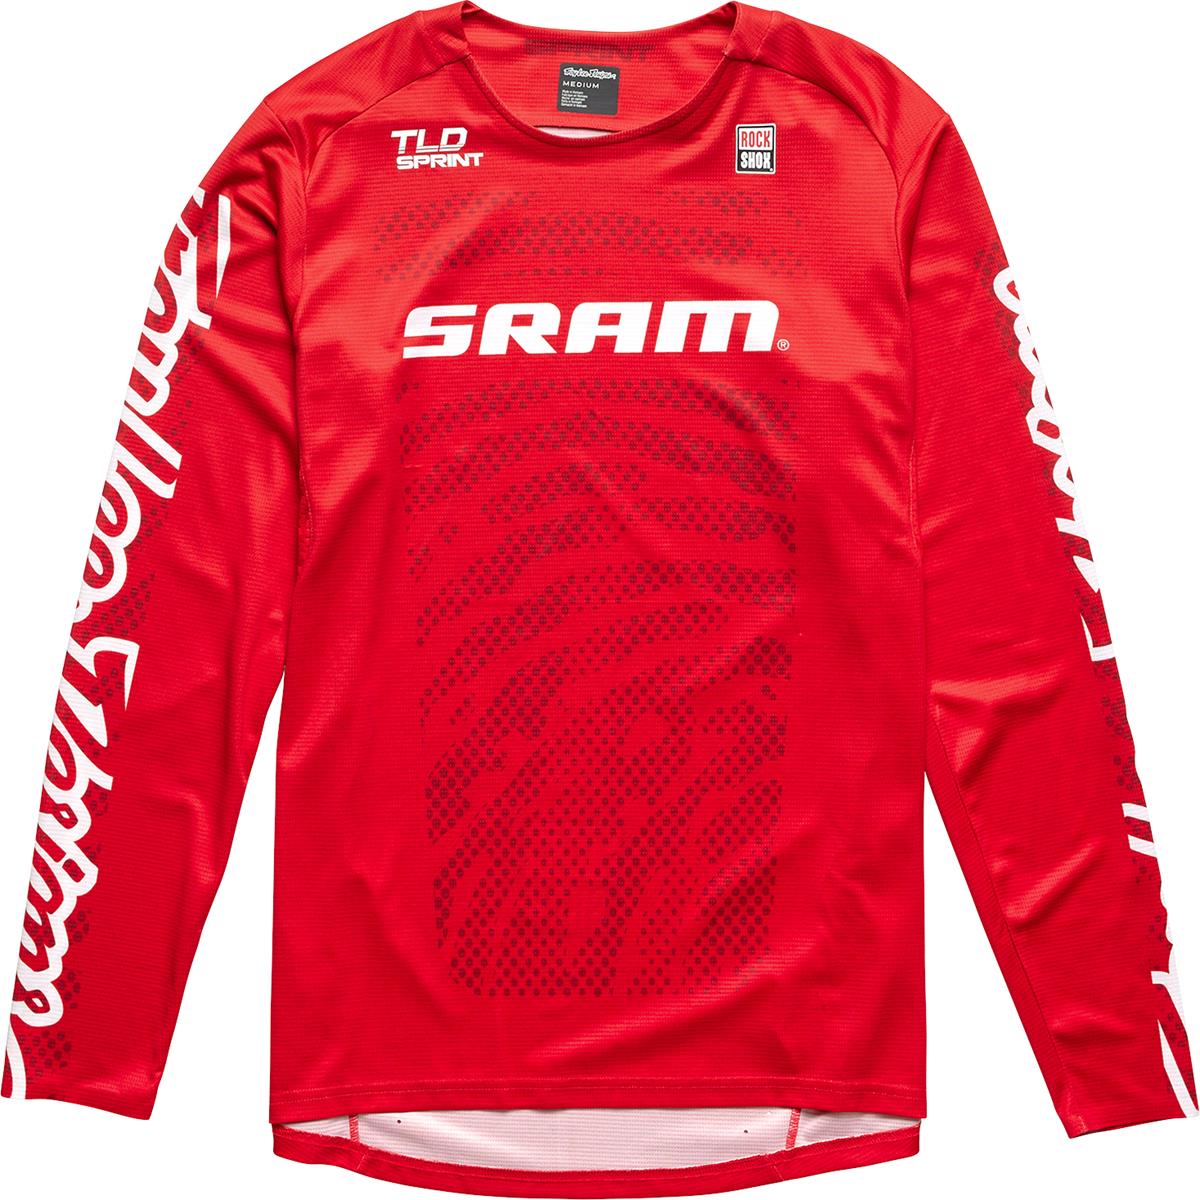 Troy Lee Designs Maillot VTT manches longues Sprint Sram - Shifted Fiery Red